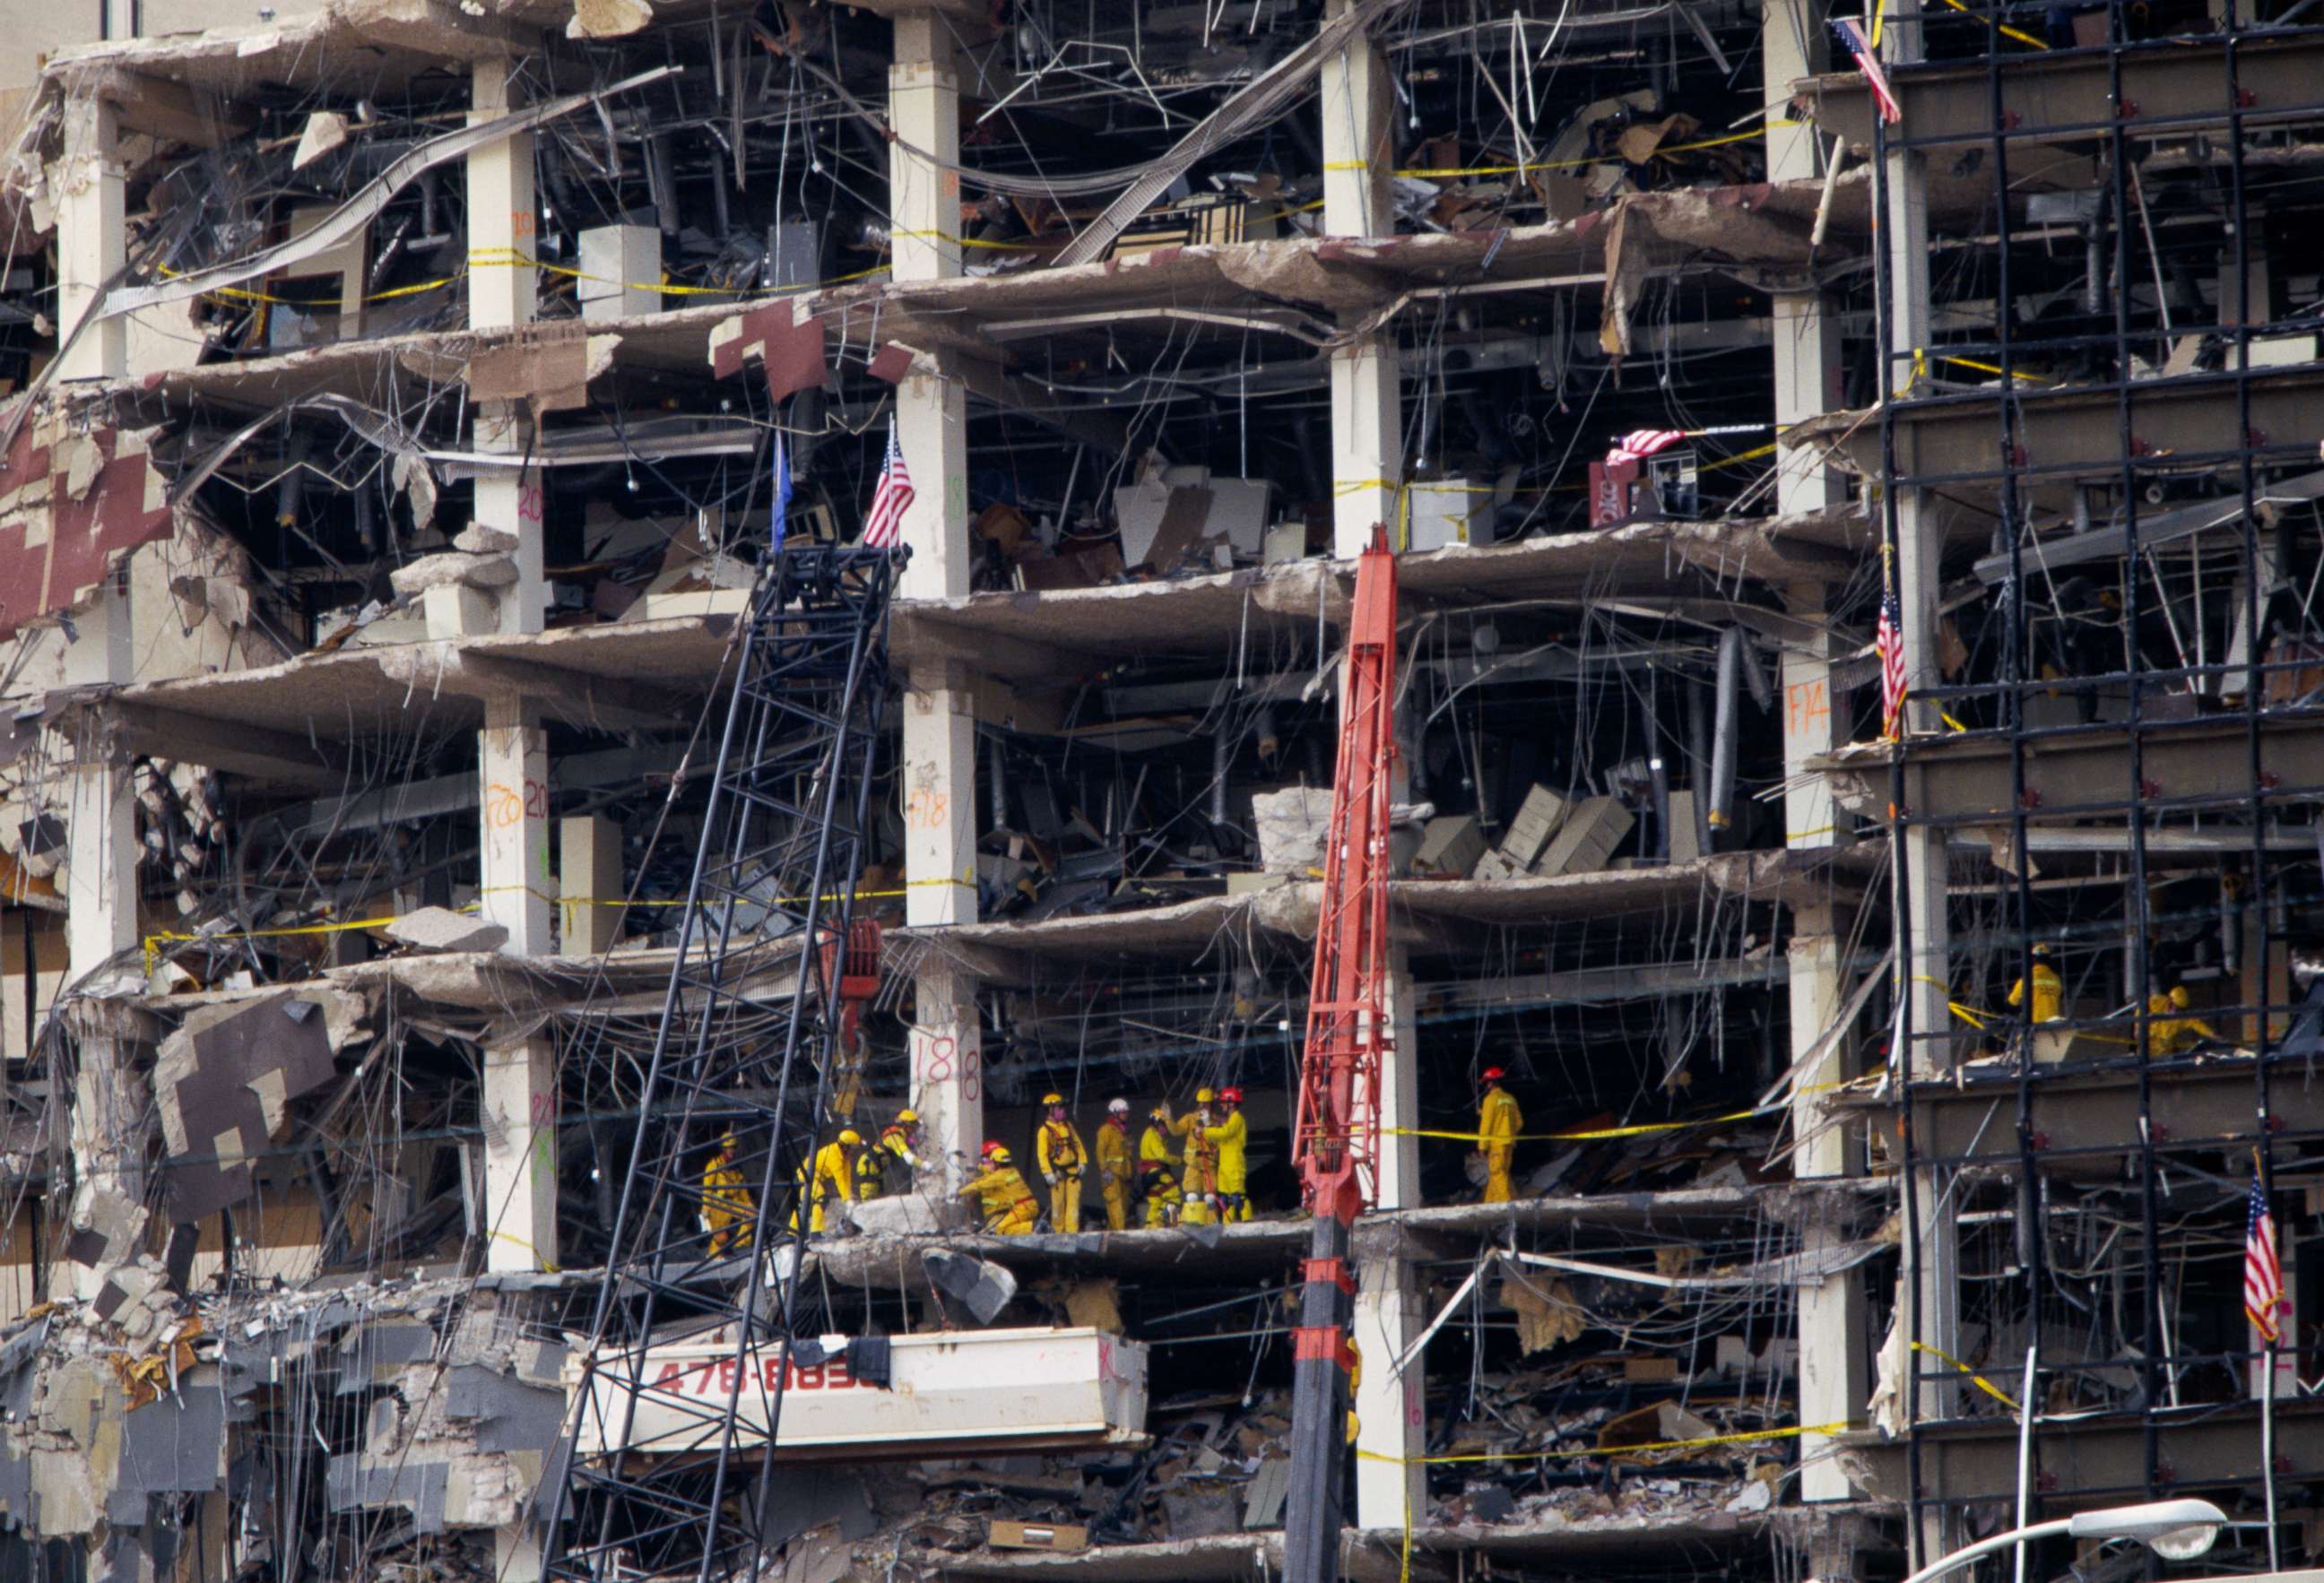 PHOTO: Rescue workers sift through the rubble of the destroyed Federal Building in the aftermath of the Oklahoma City bombing, April 25, 1999.